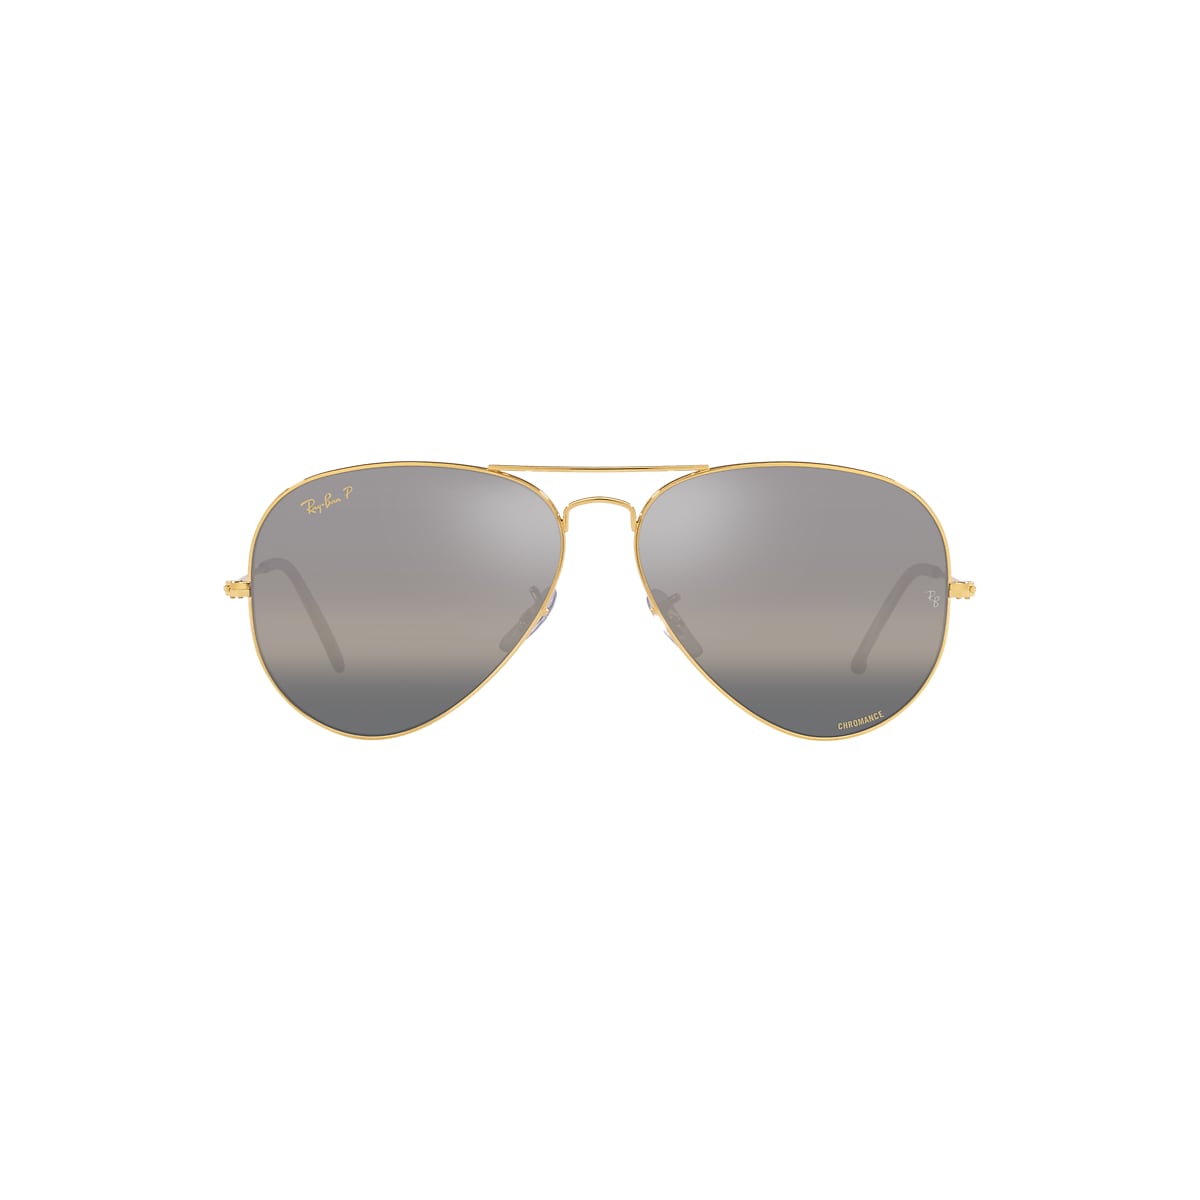 AVIATOR CHROMANCE Sunglasses in Gold and Grey - RB3025 